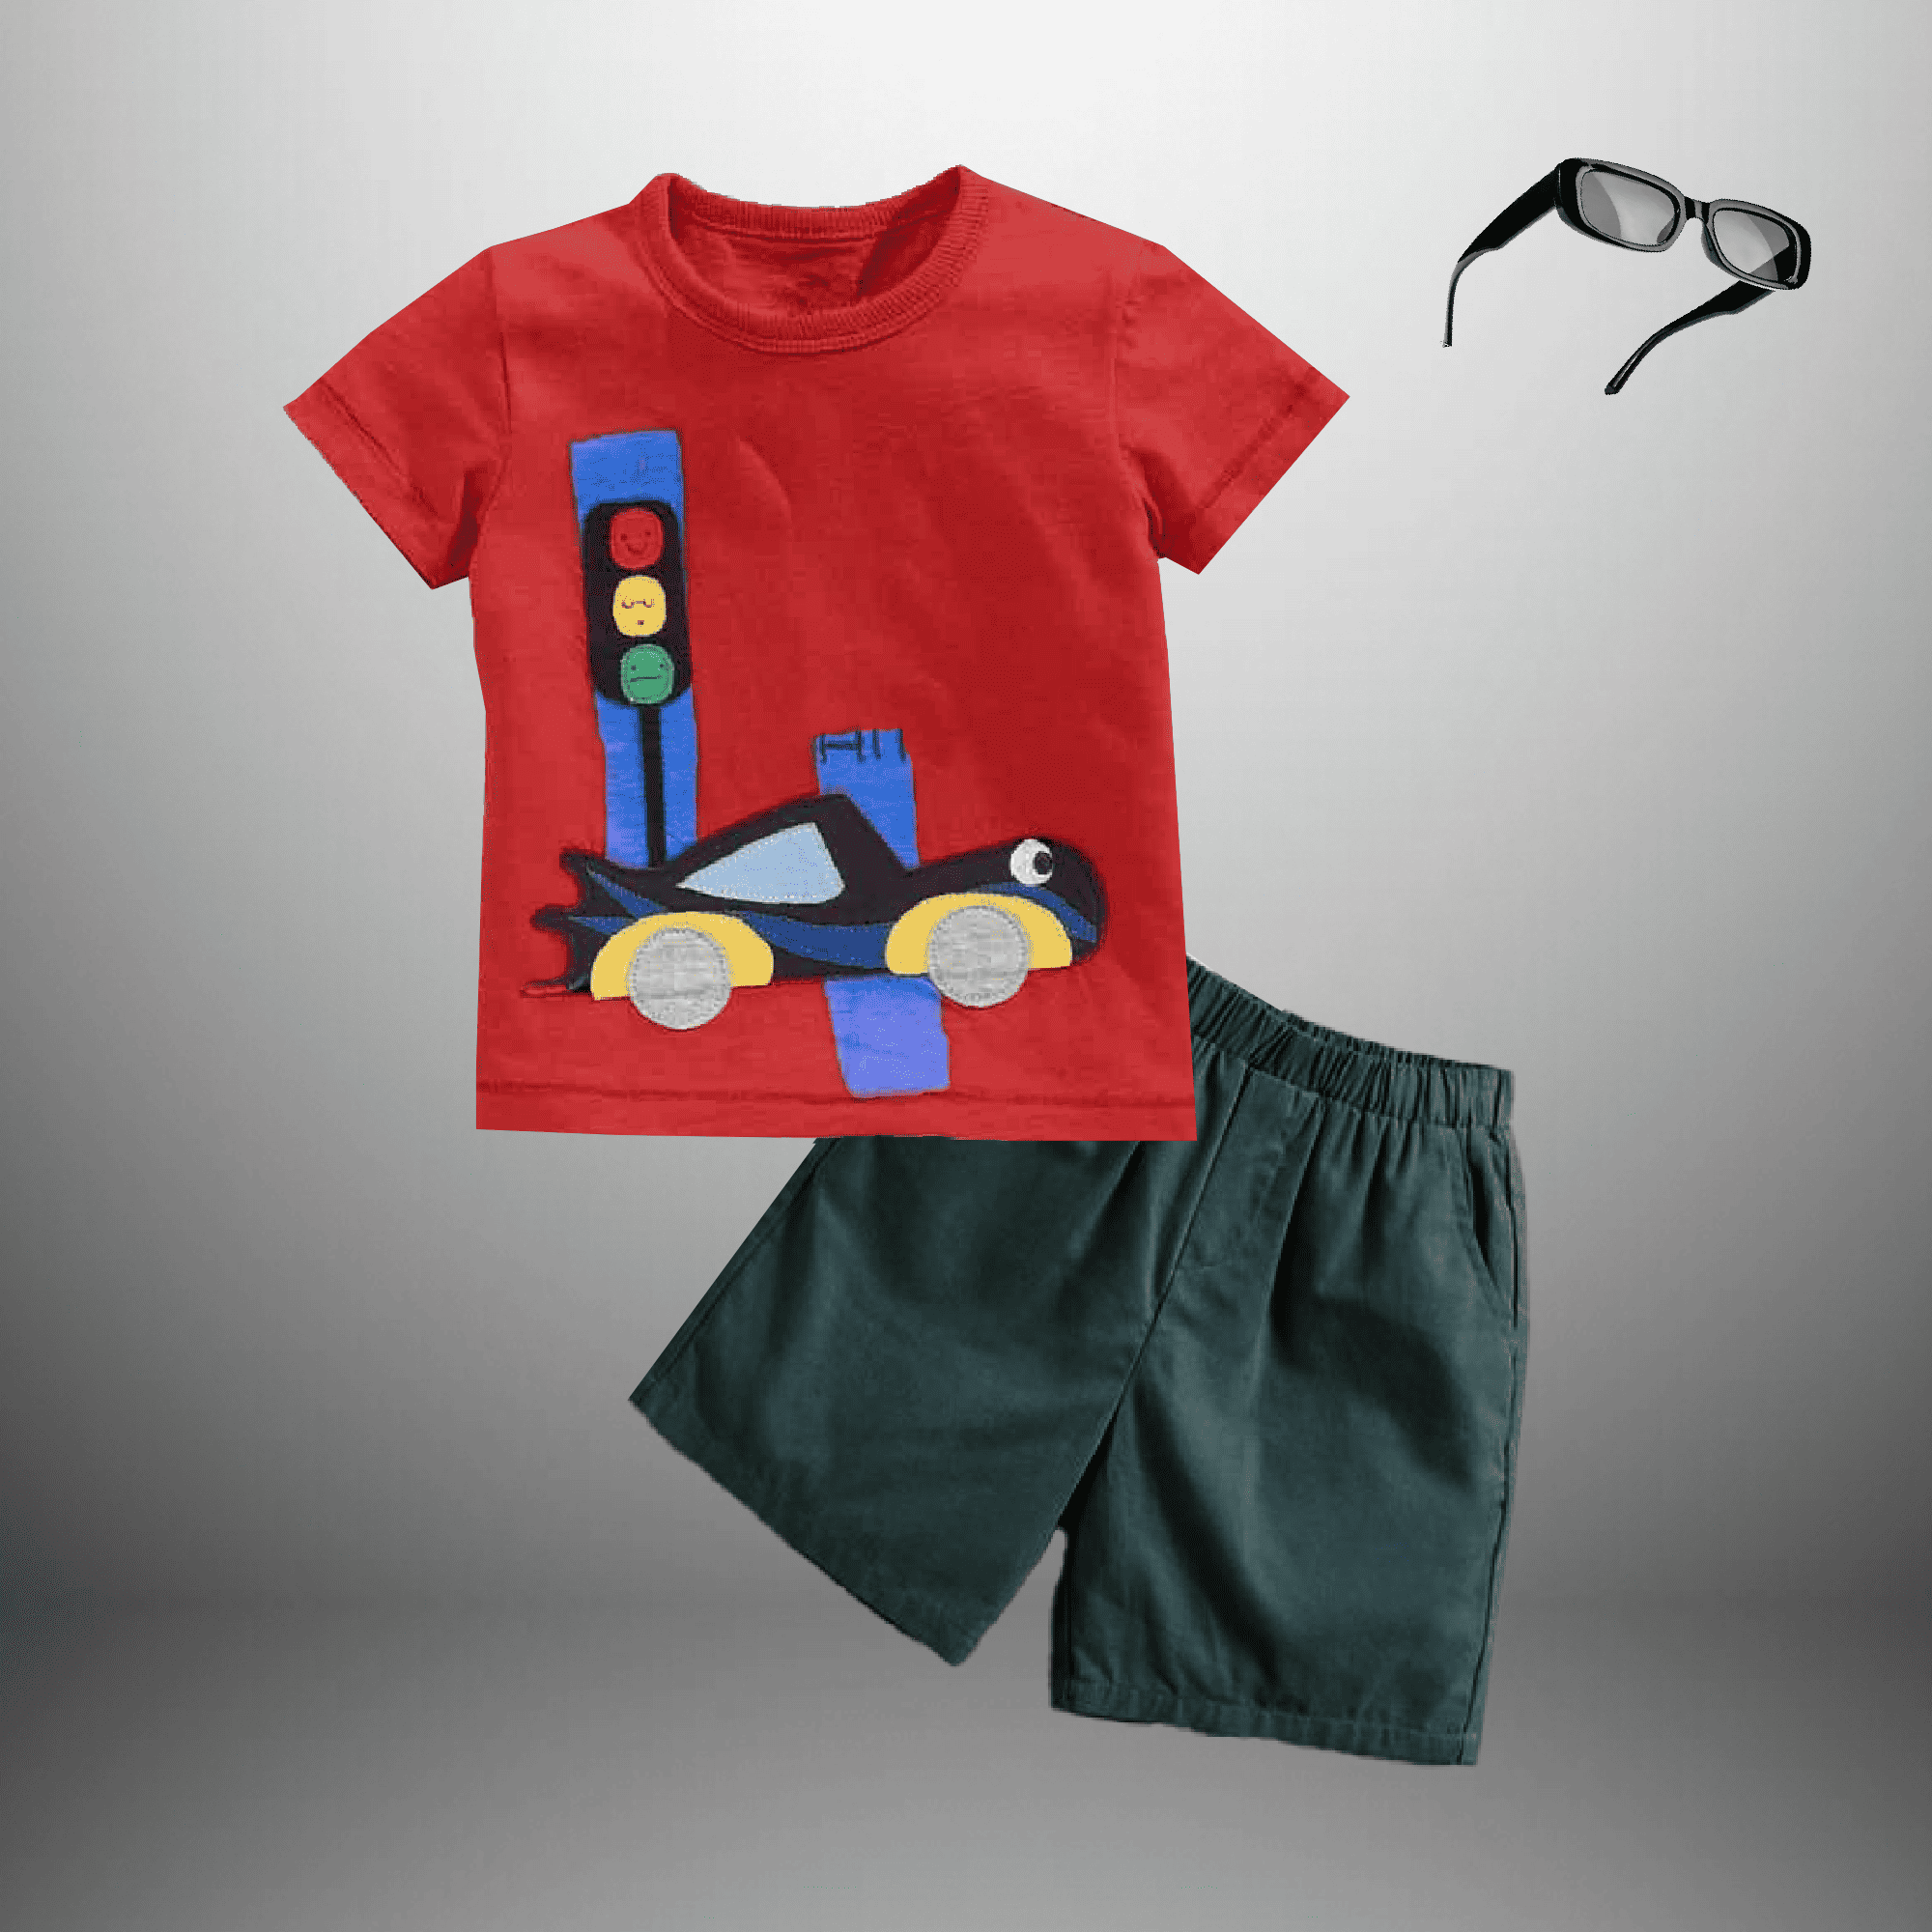 Boy's 2 piece set of a Red T-shirt and shorts with a free Sunglasses-RKFCW489